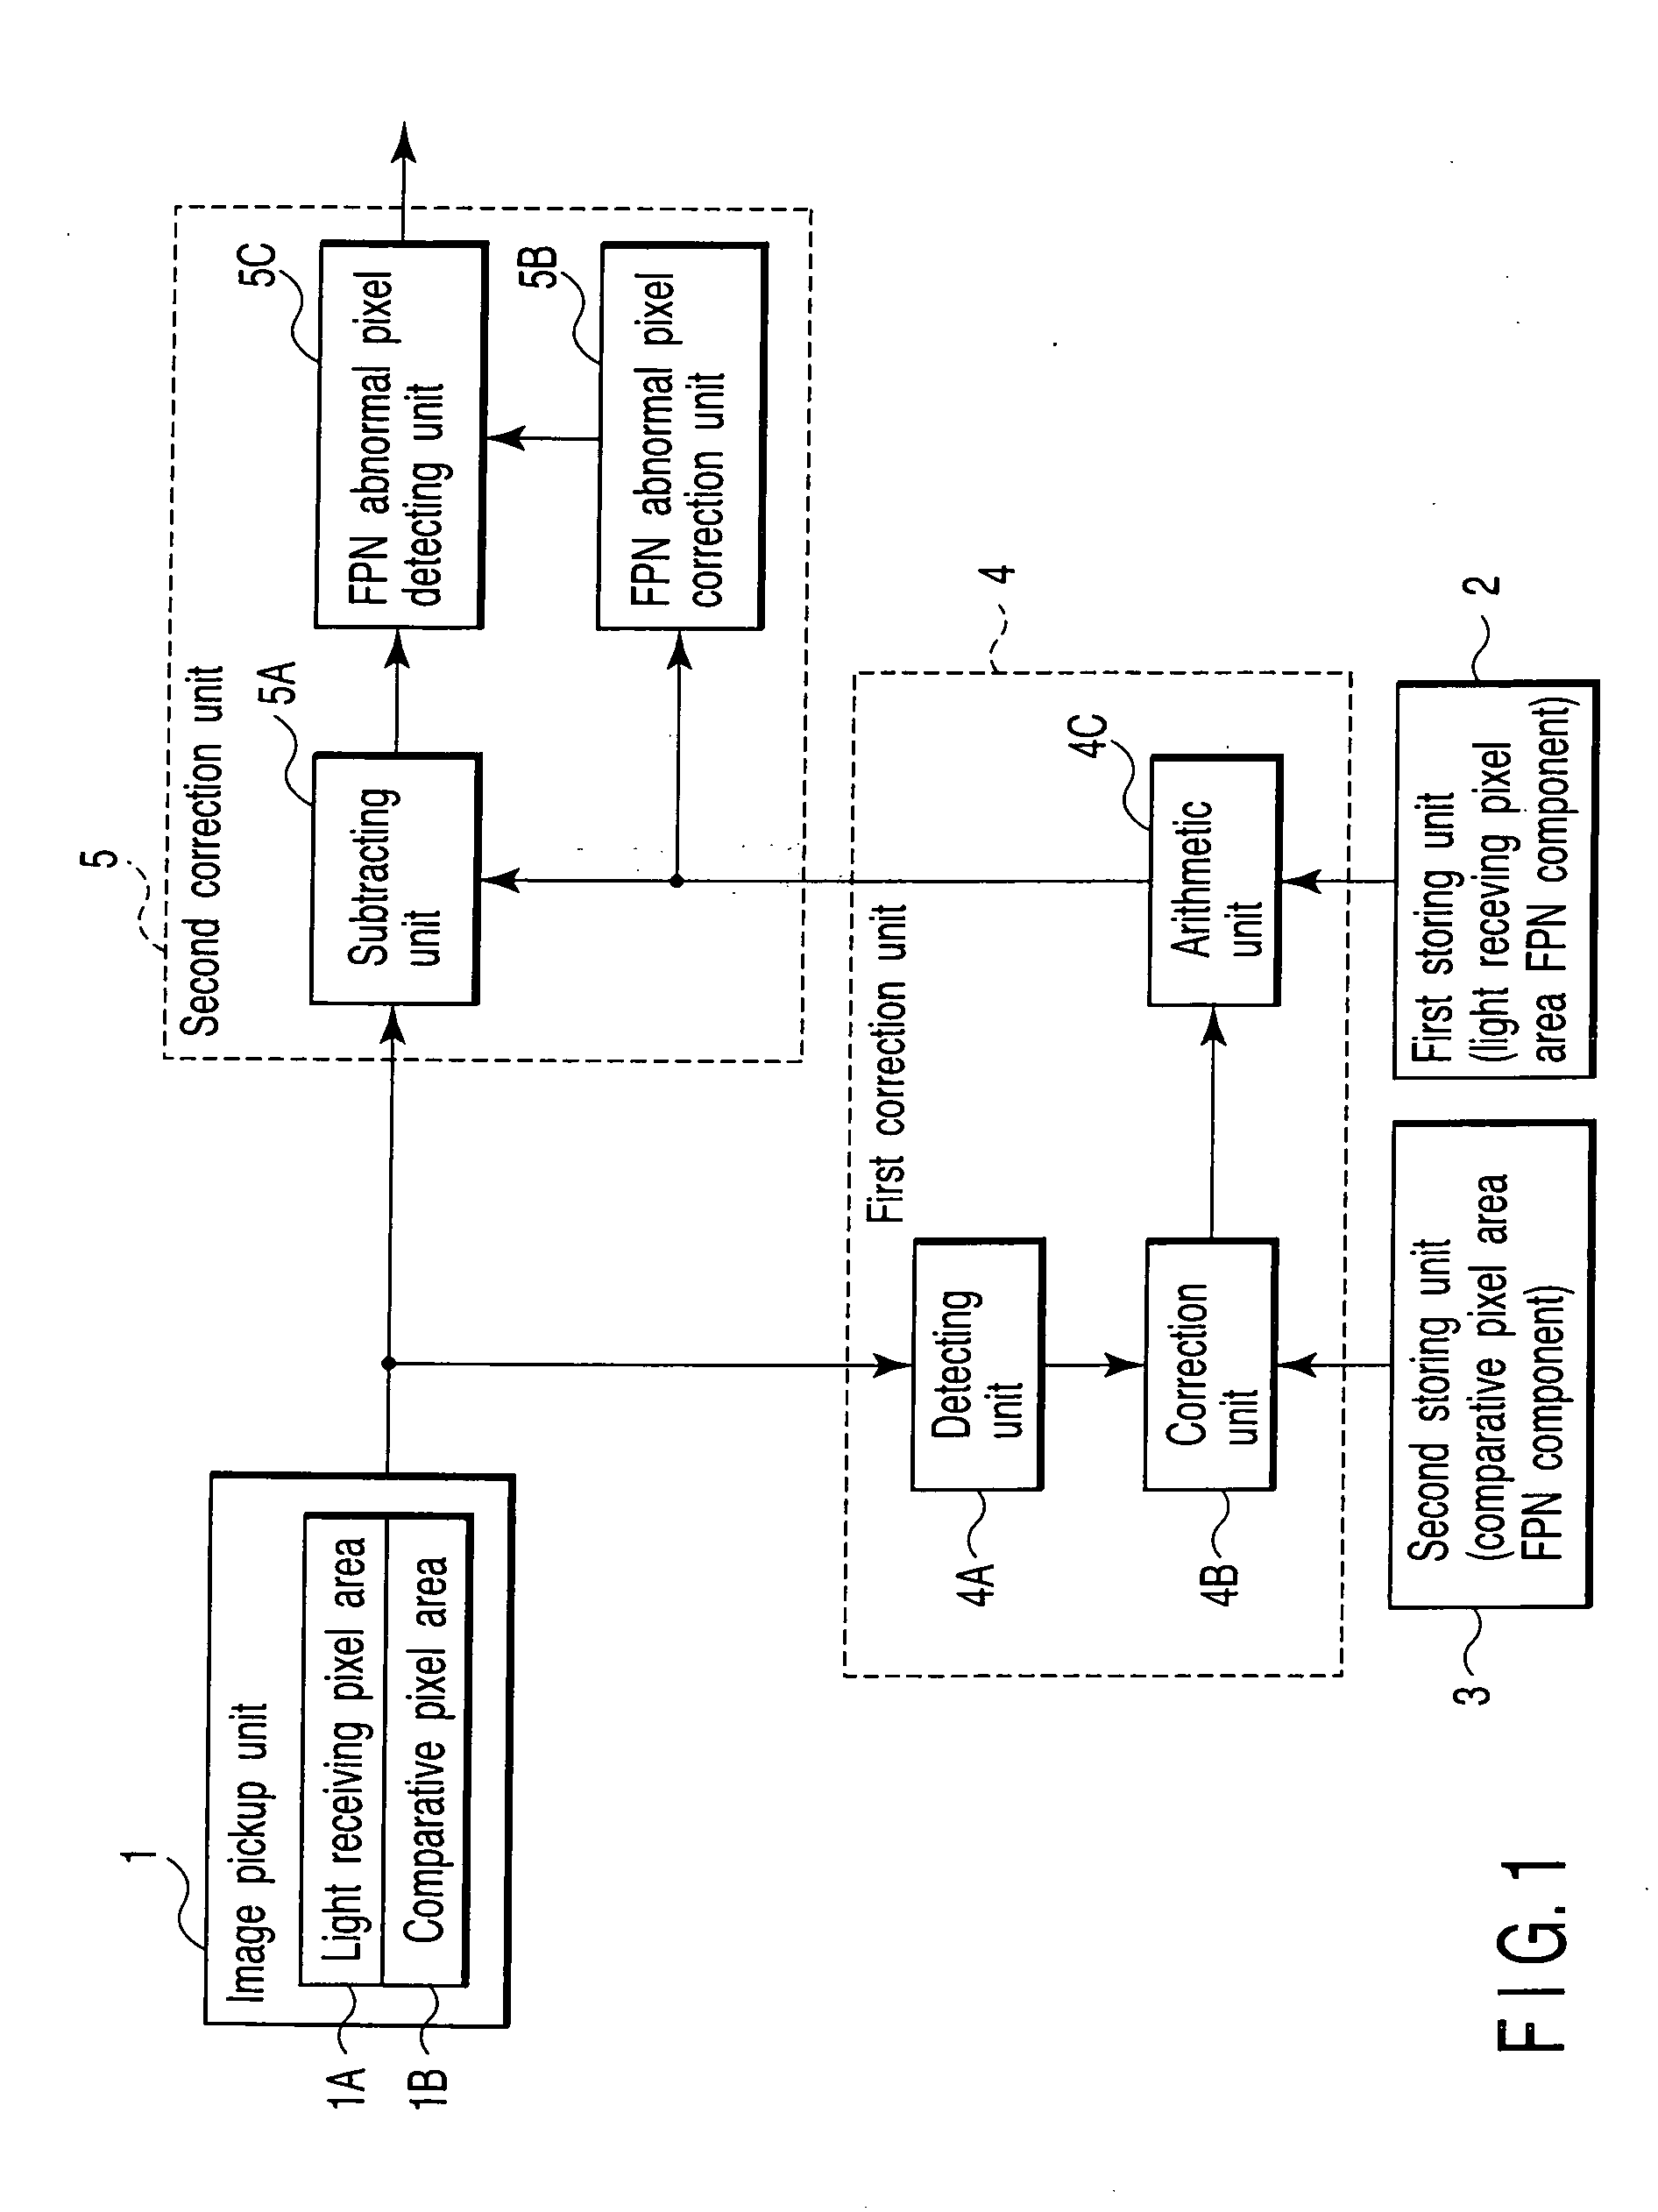 Image pickup apparatus having function of suppressing fixed pattern noise